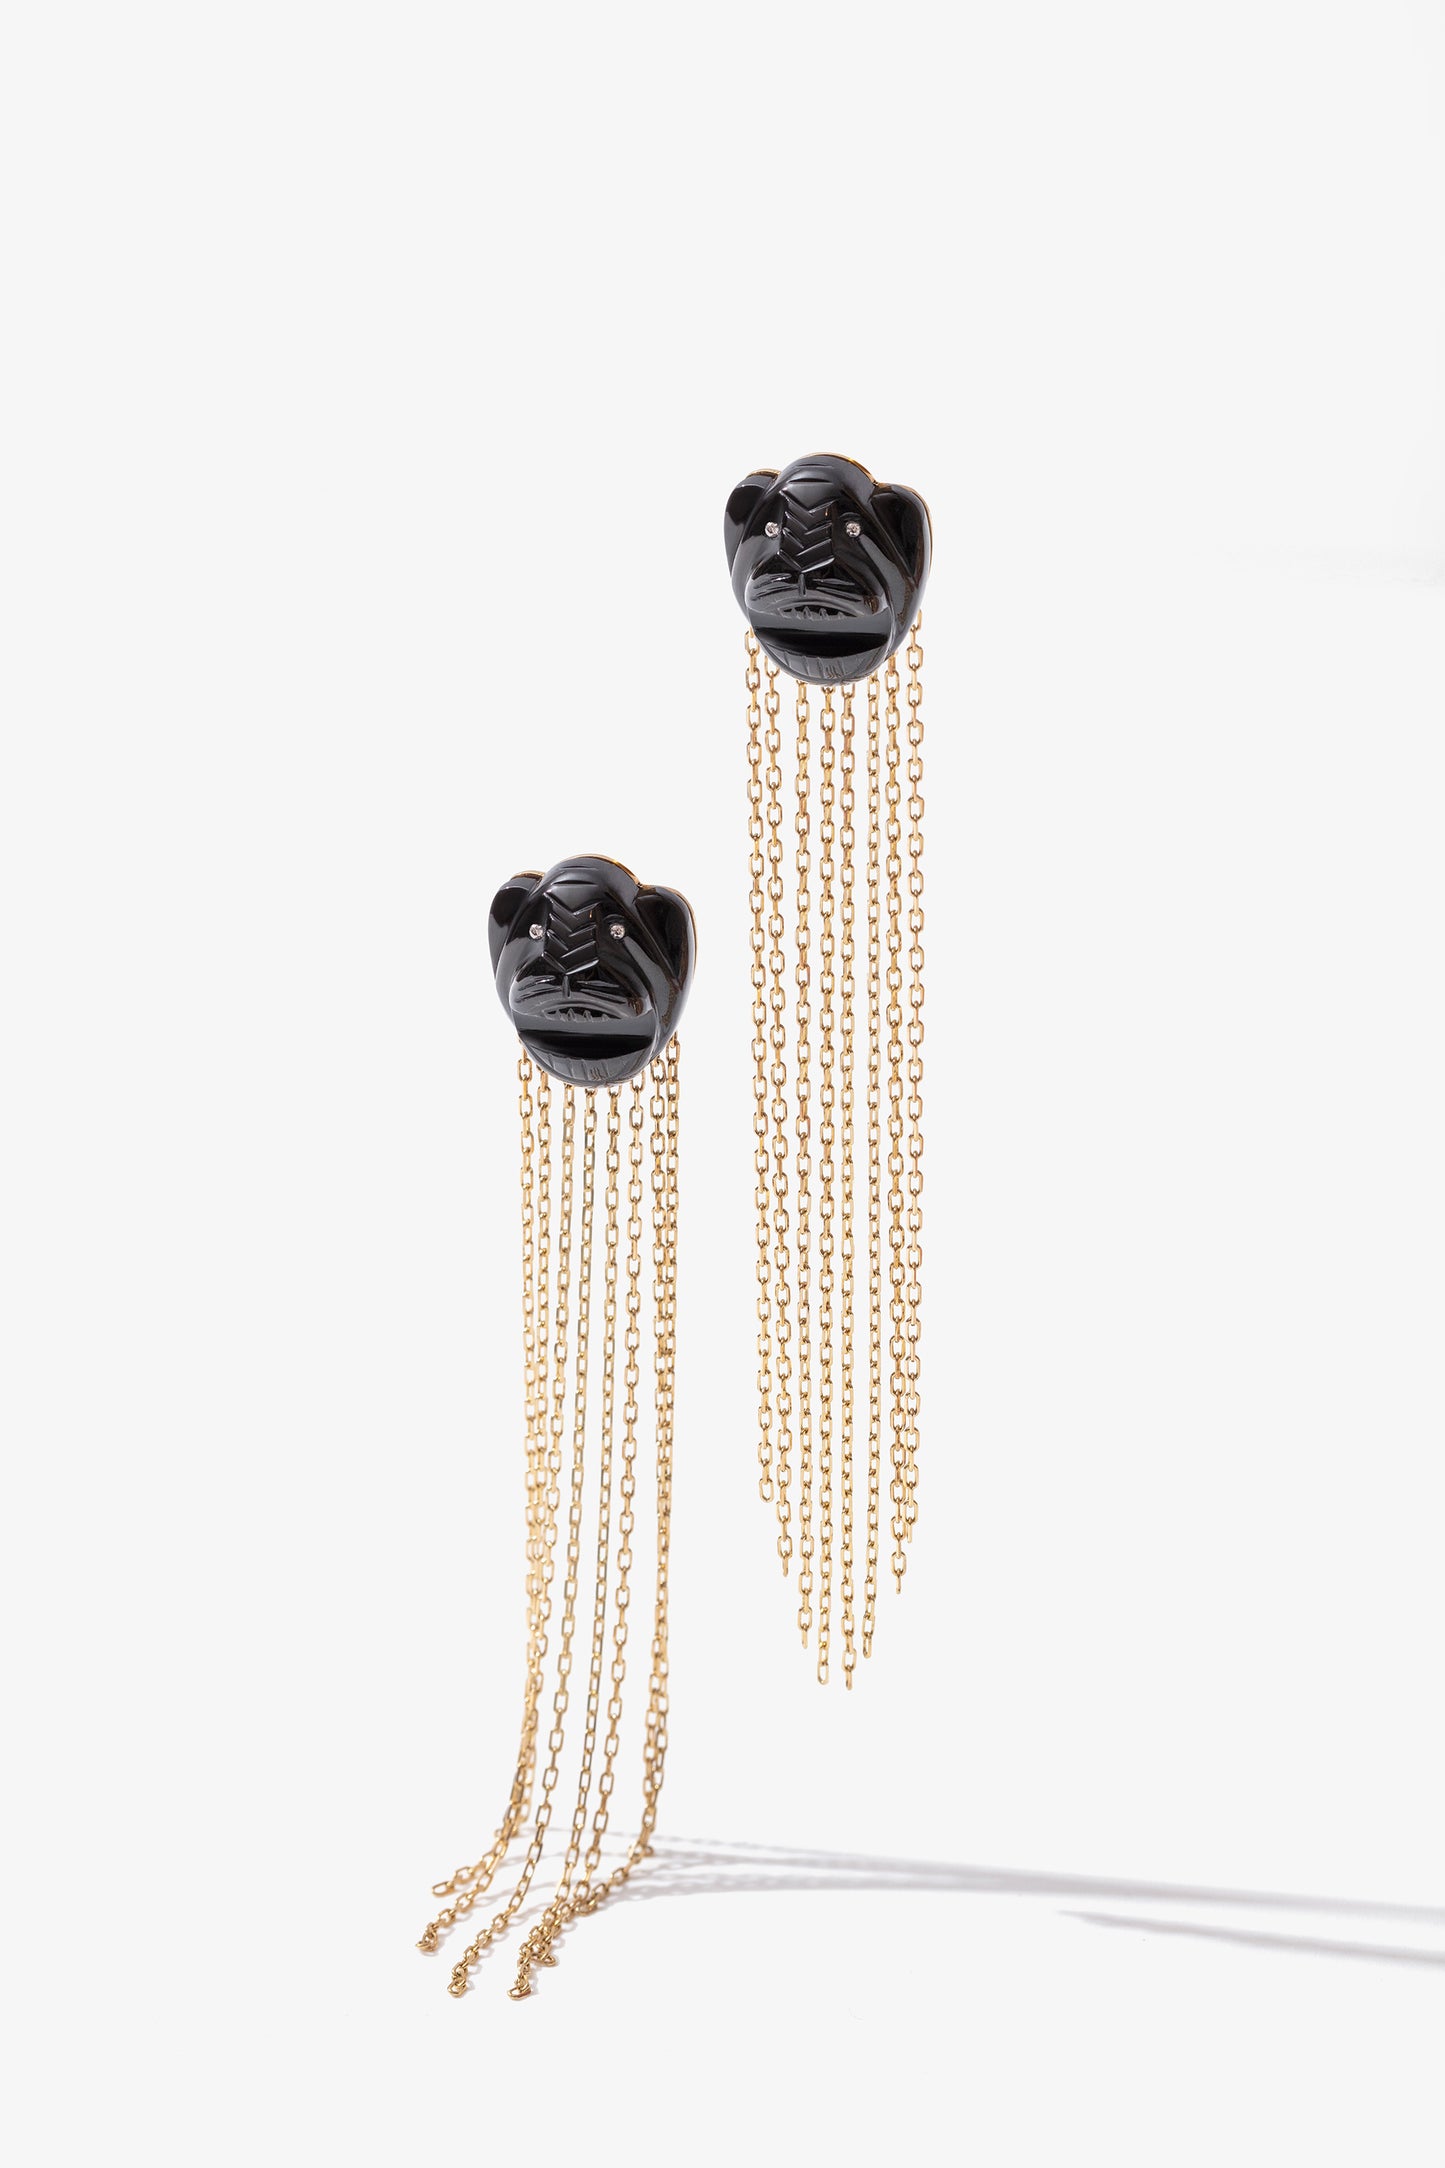 Jaguar Stone Earrings with Chains